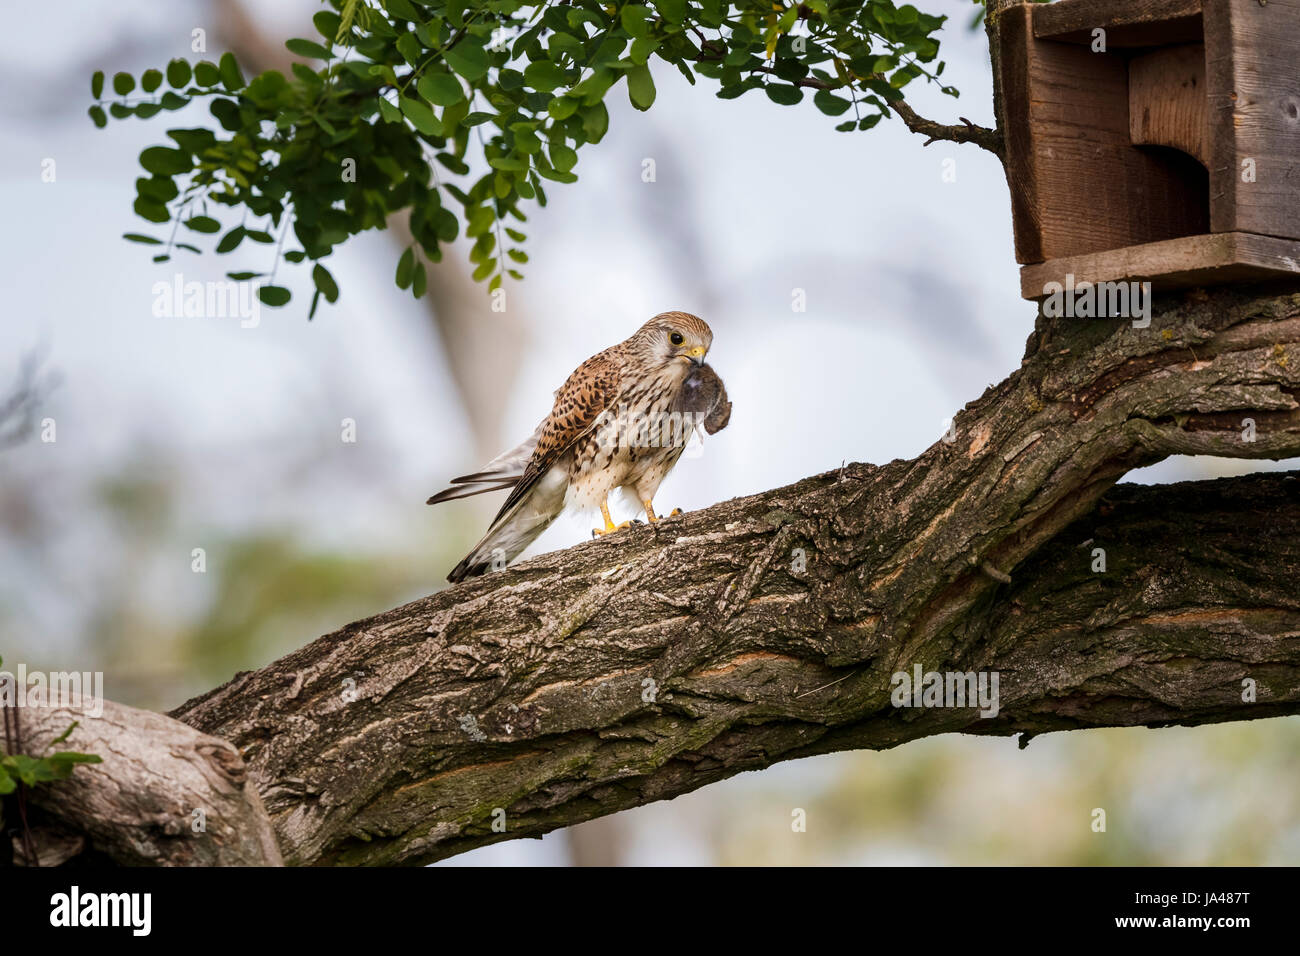 Female red-footed falcon (Falco vespertinus) with mouse prey on a branch by a nesting box, Koros-Maros National Park, Bekes County, Hungary Stock Photo